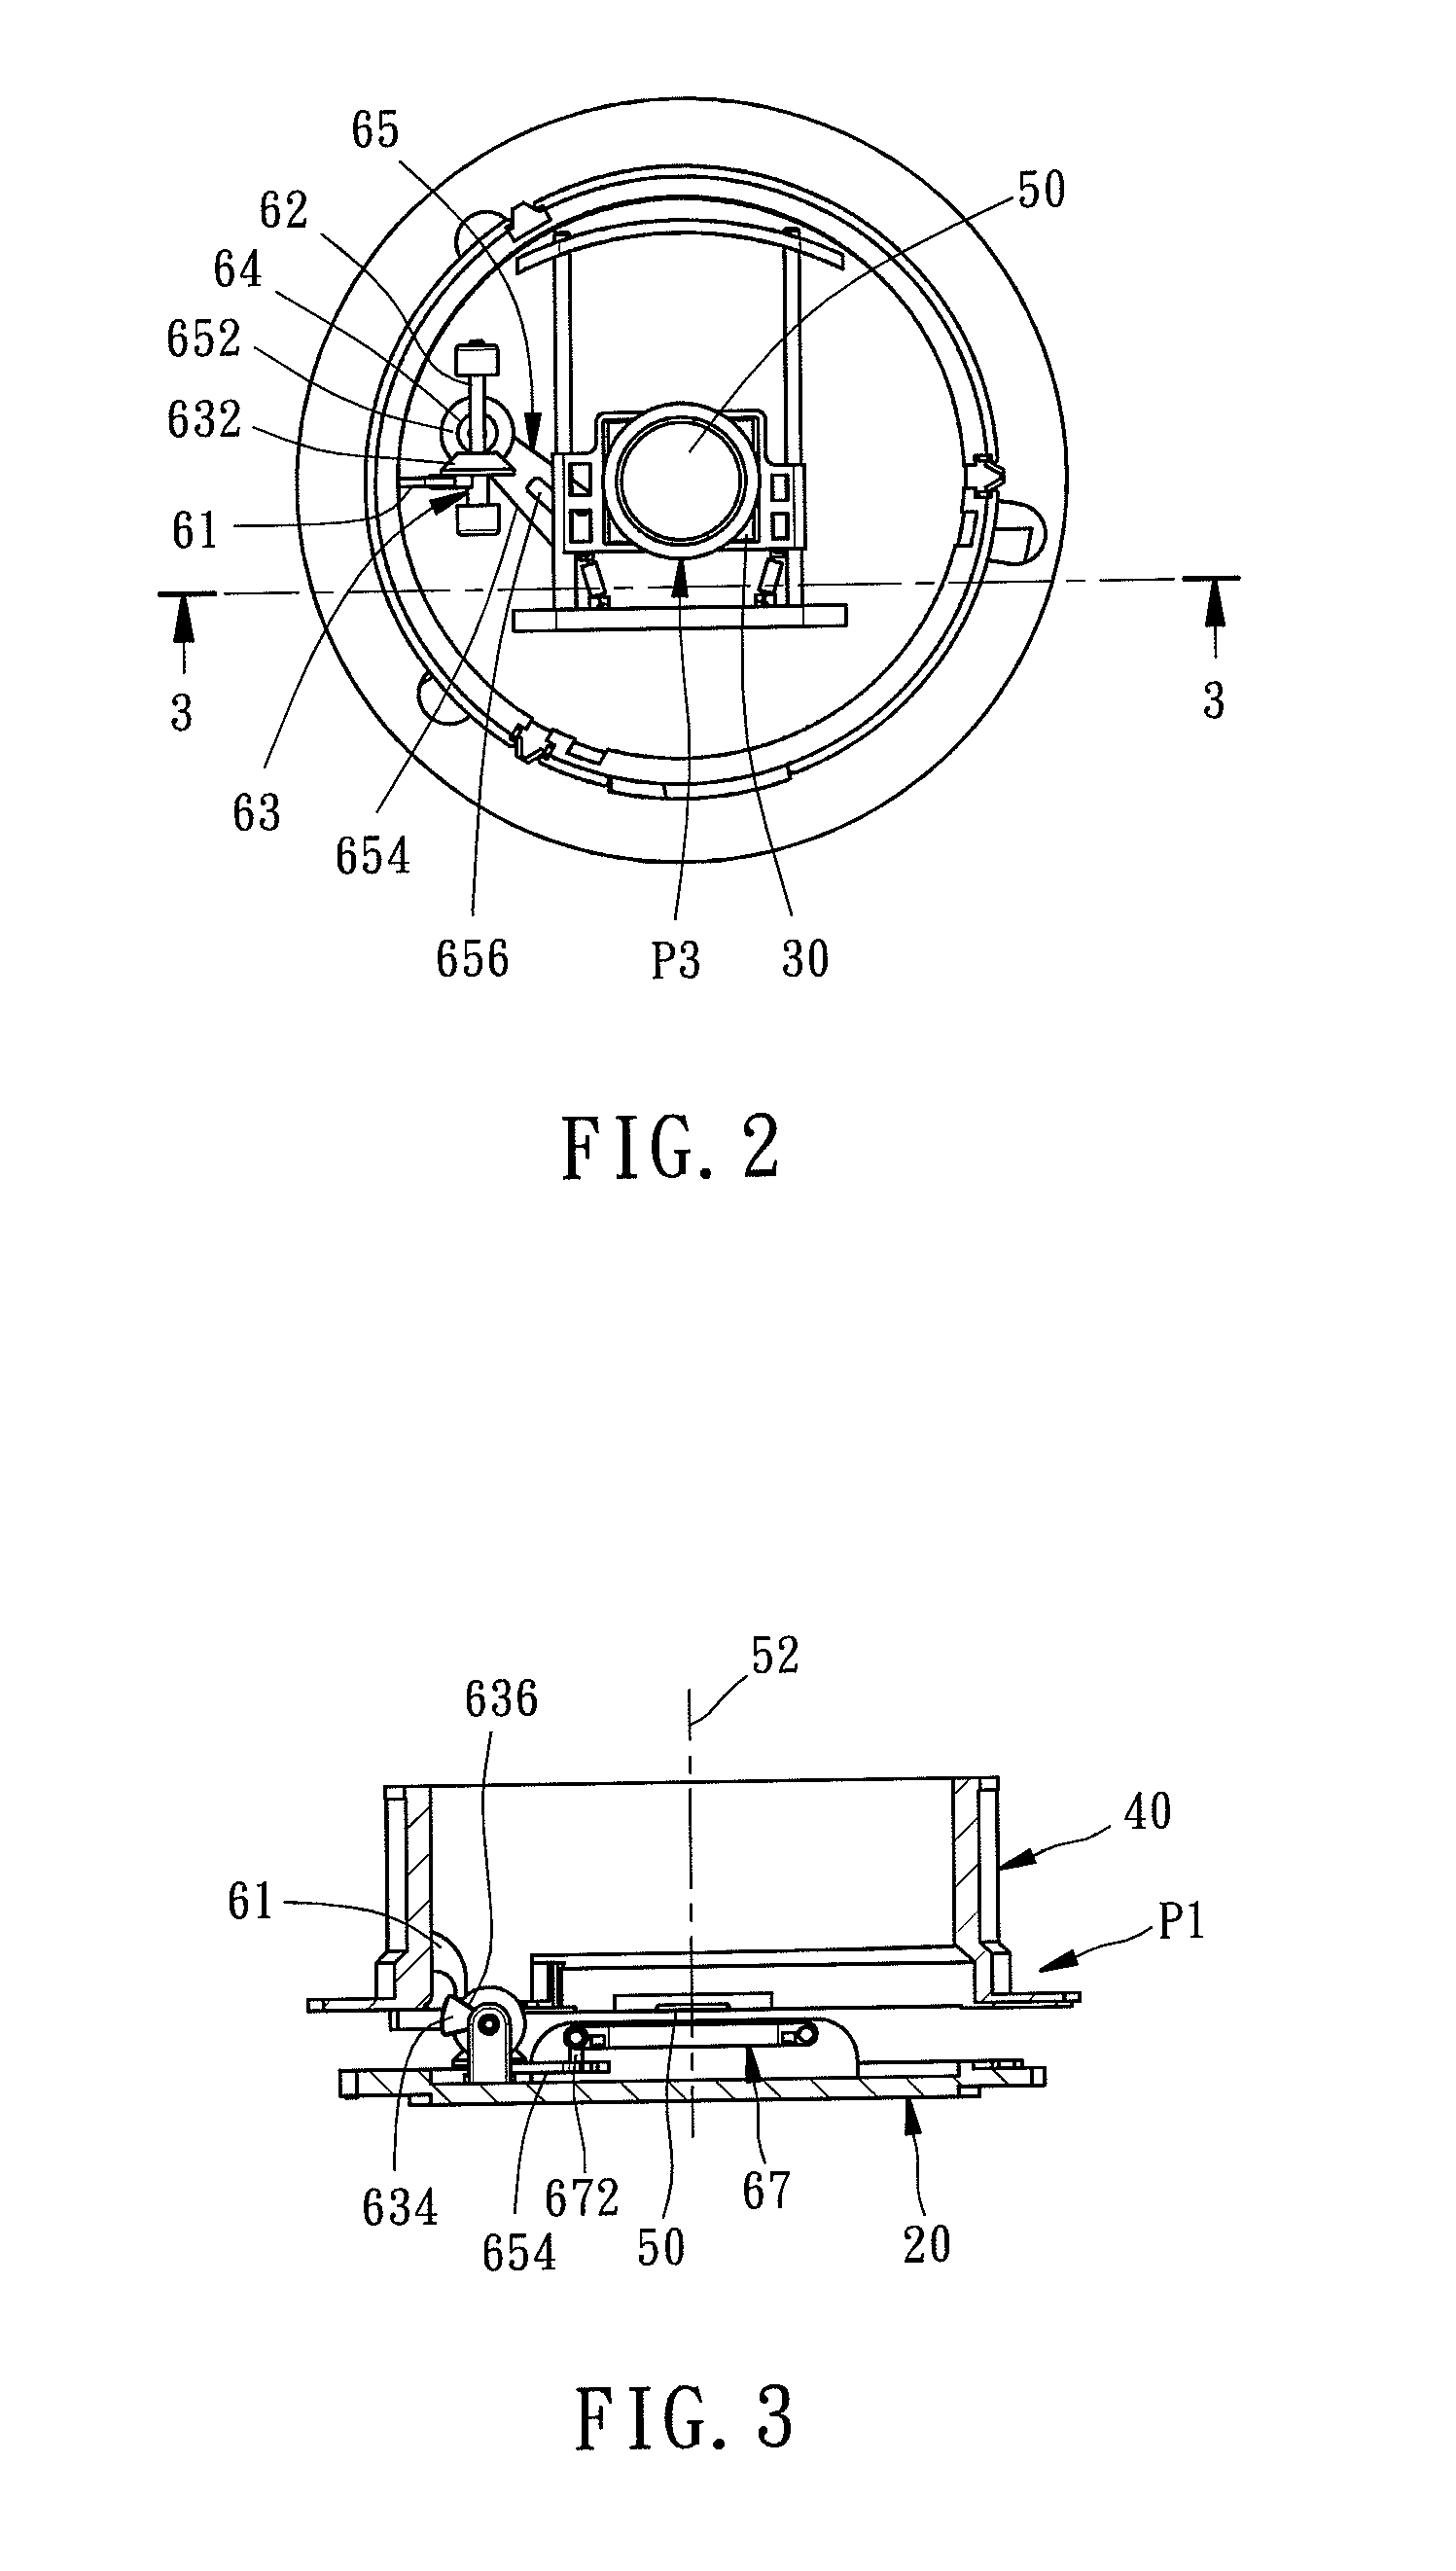 Lens assembly with an image sensor backoff mechanism